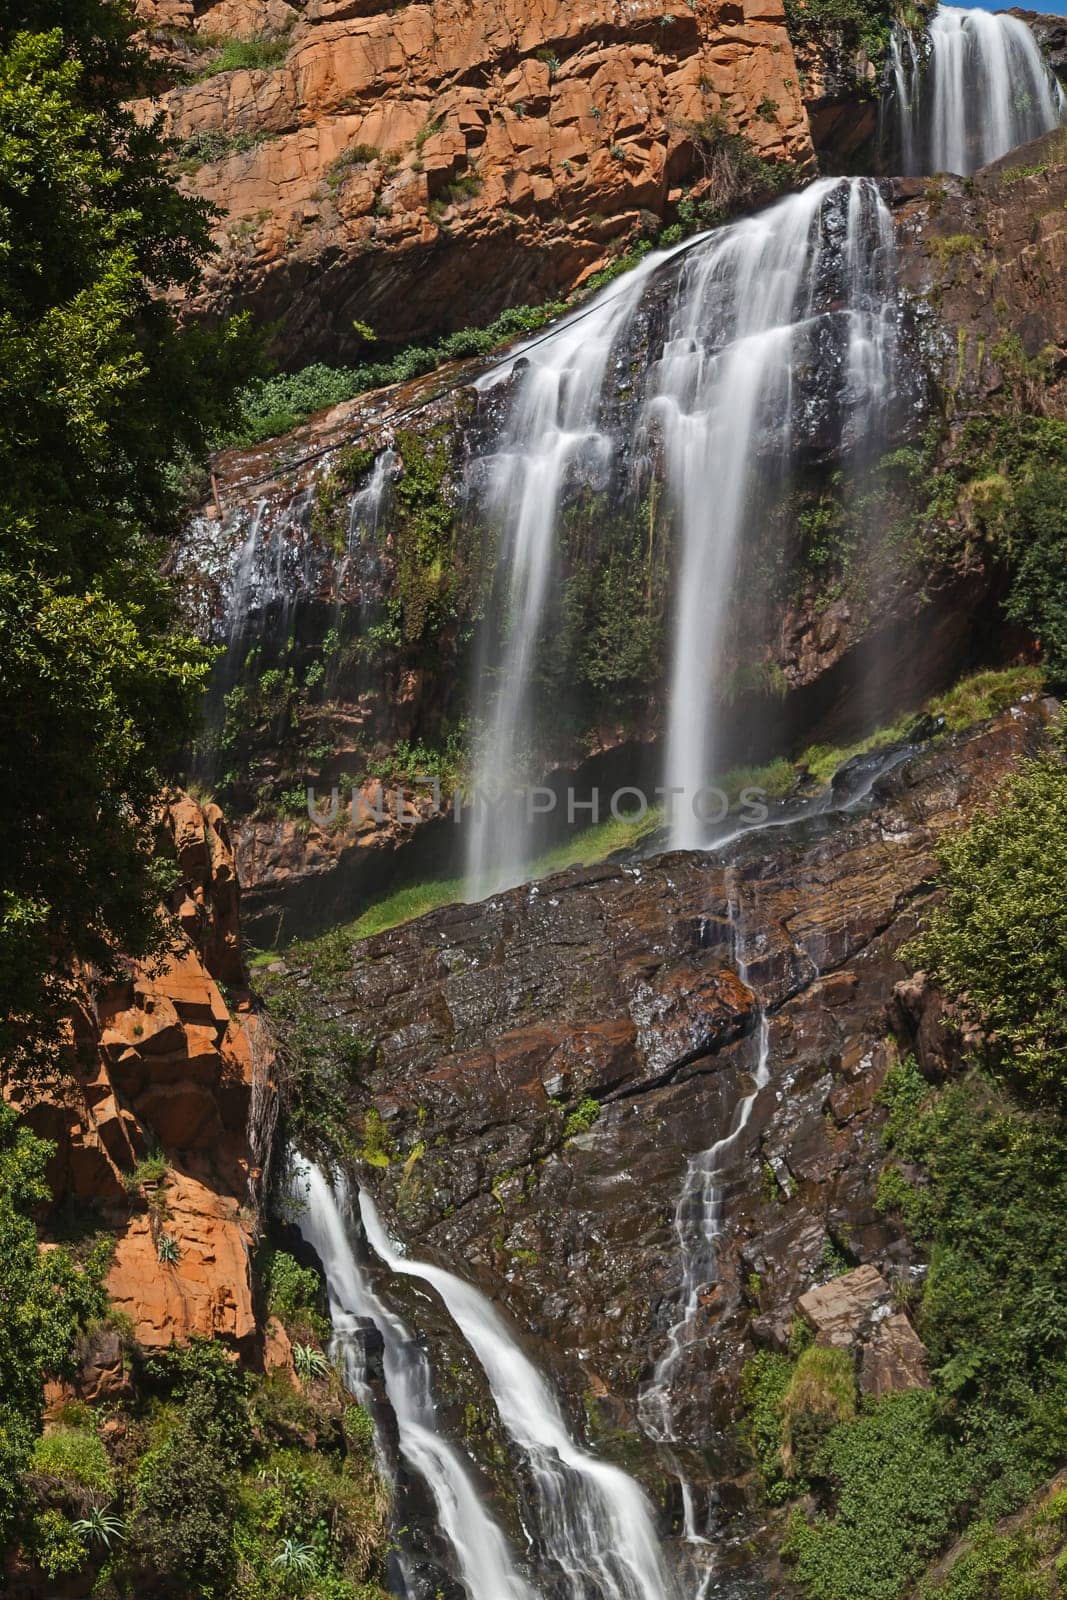 The waterfall in the Walther Sisulu Botanical Garden in Johannesburg South Africa is famous for the pair of Verreaux's Eagles nesting next to it